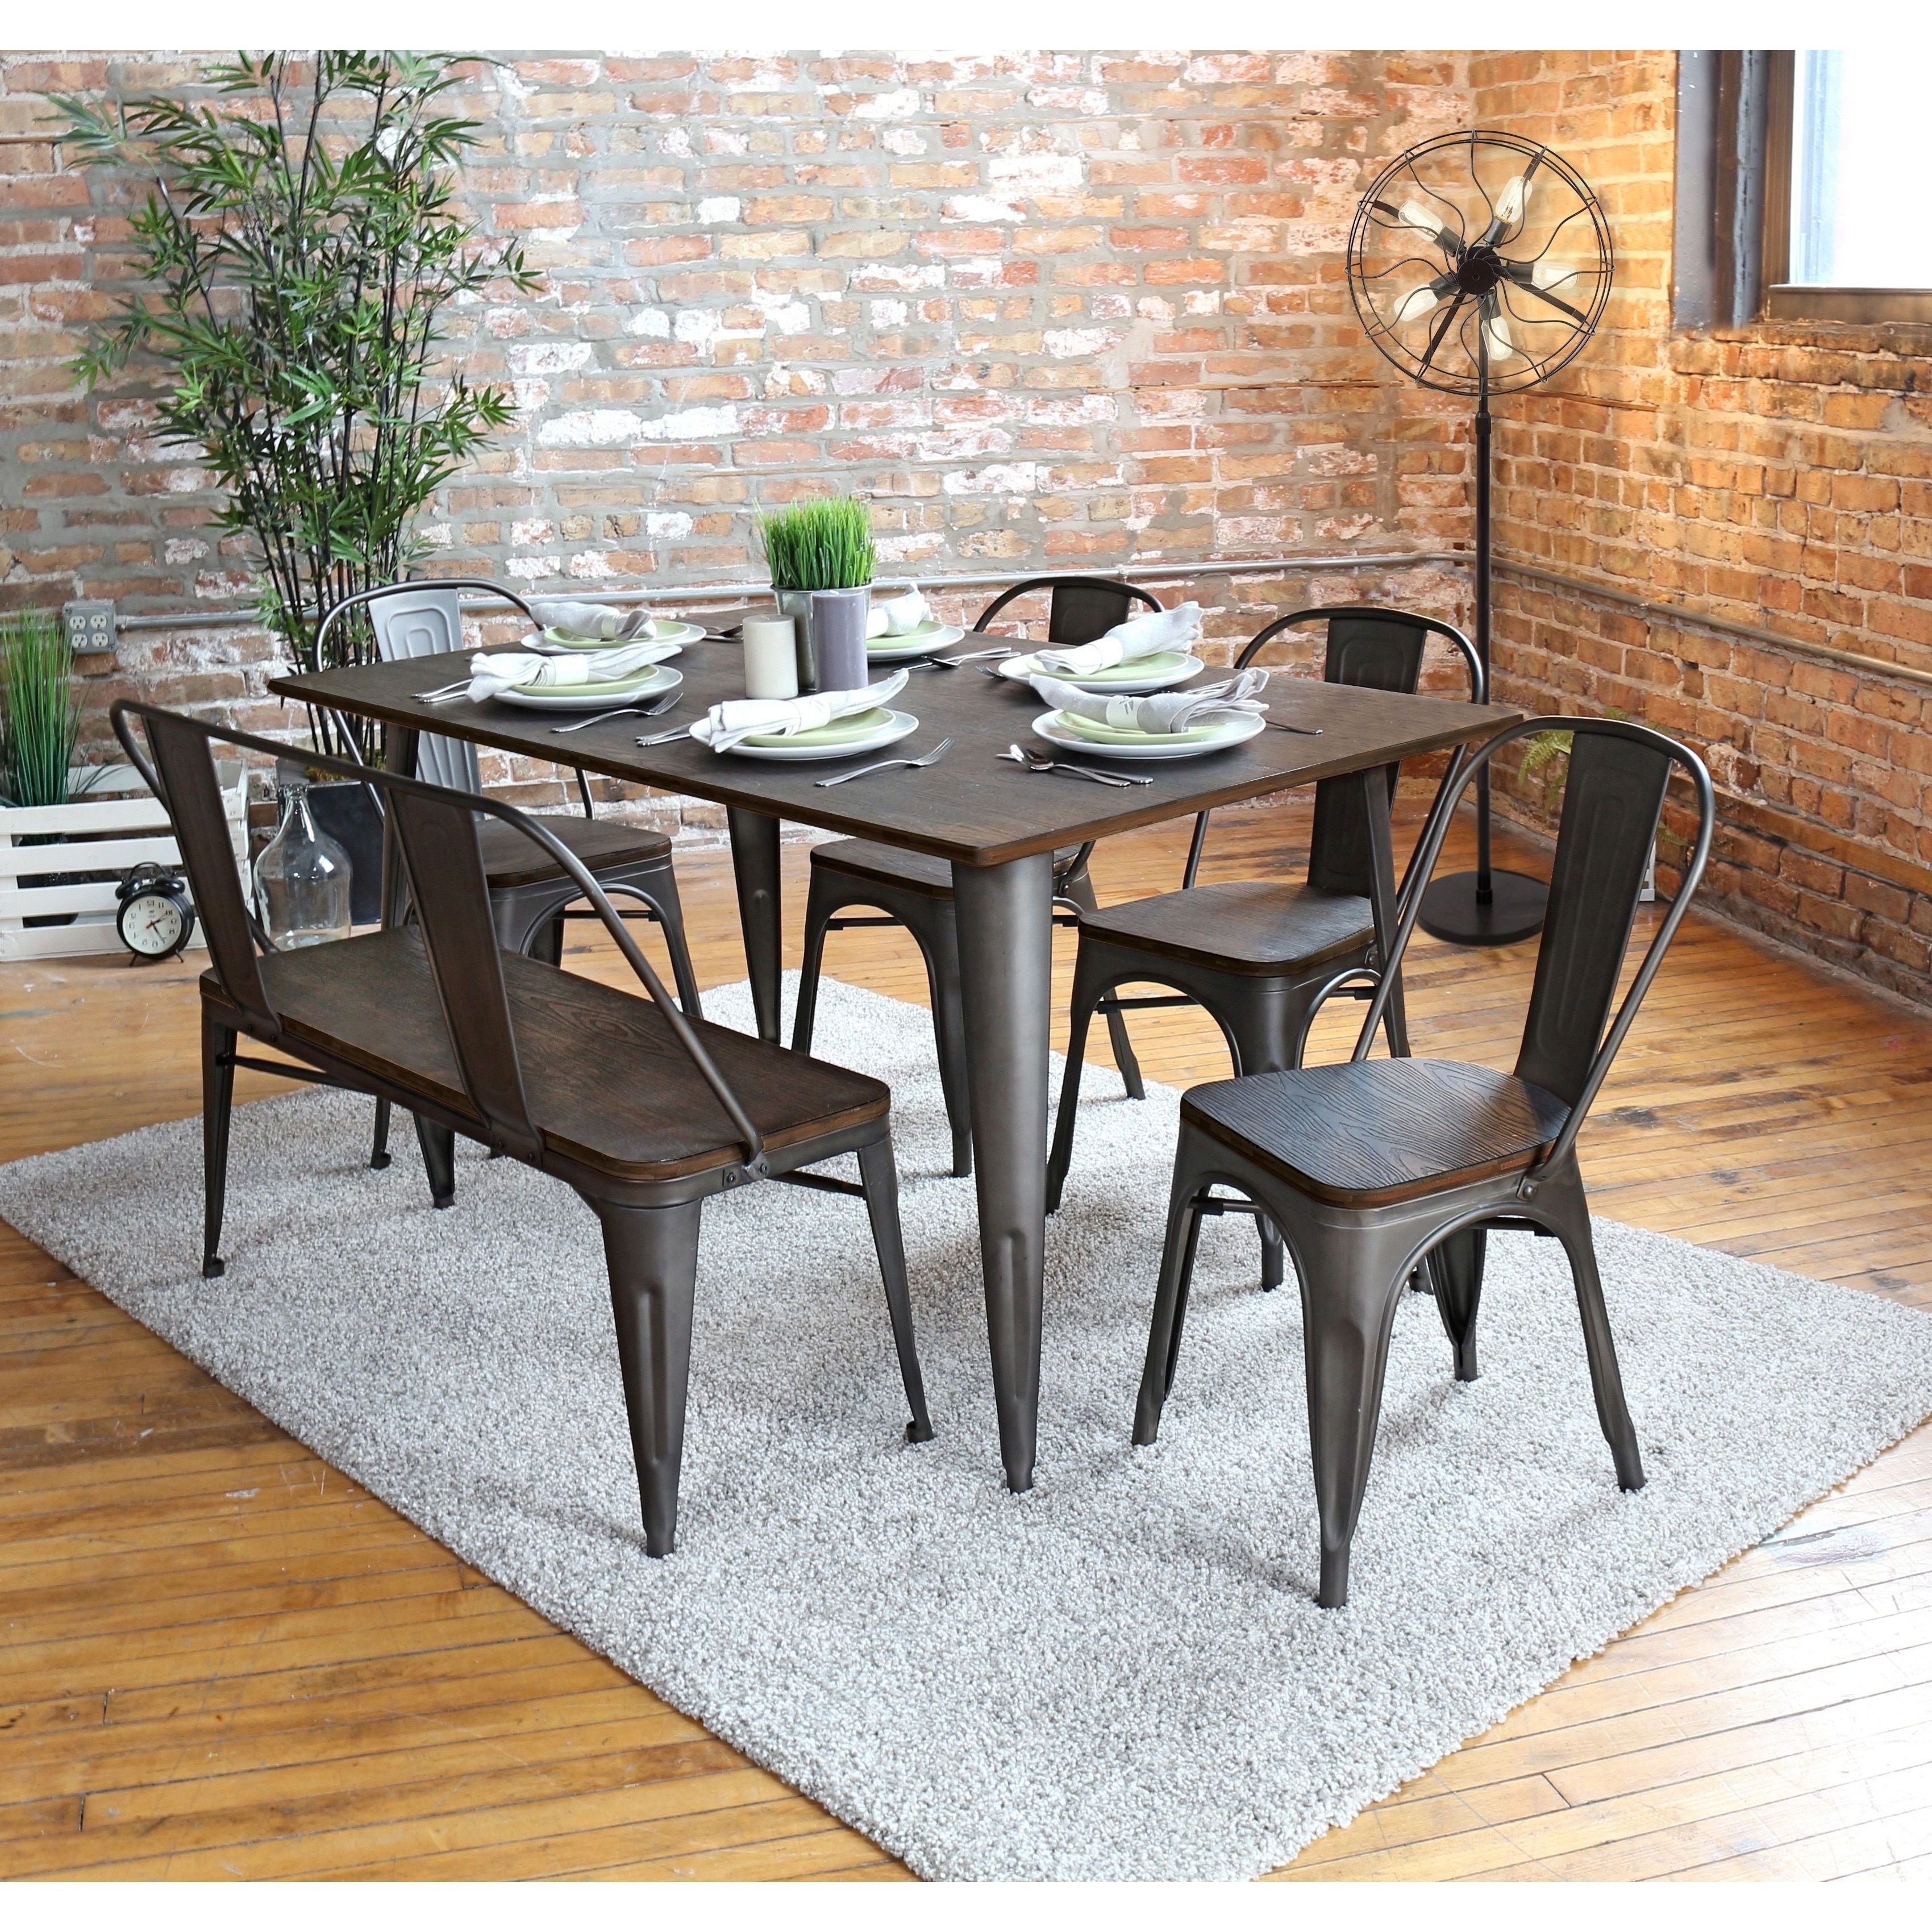 Best And Newest Ashton Round Pedestal Dining Table Elegant Kitchen Dining Area Within Jaxon Grey 5 Piece Round Extension Dining Sets With Wood Chairs (View 10 of 25)